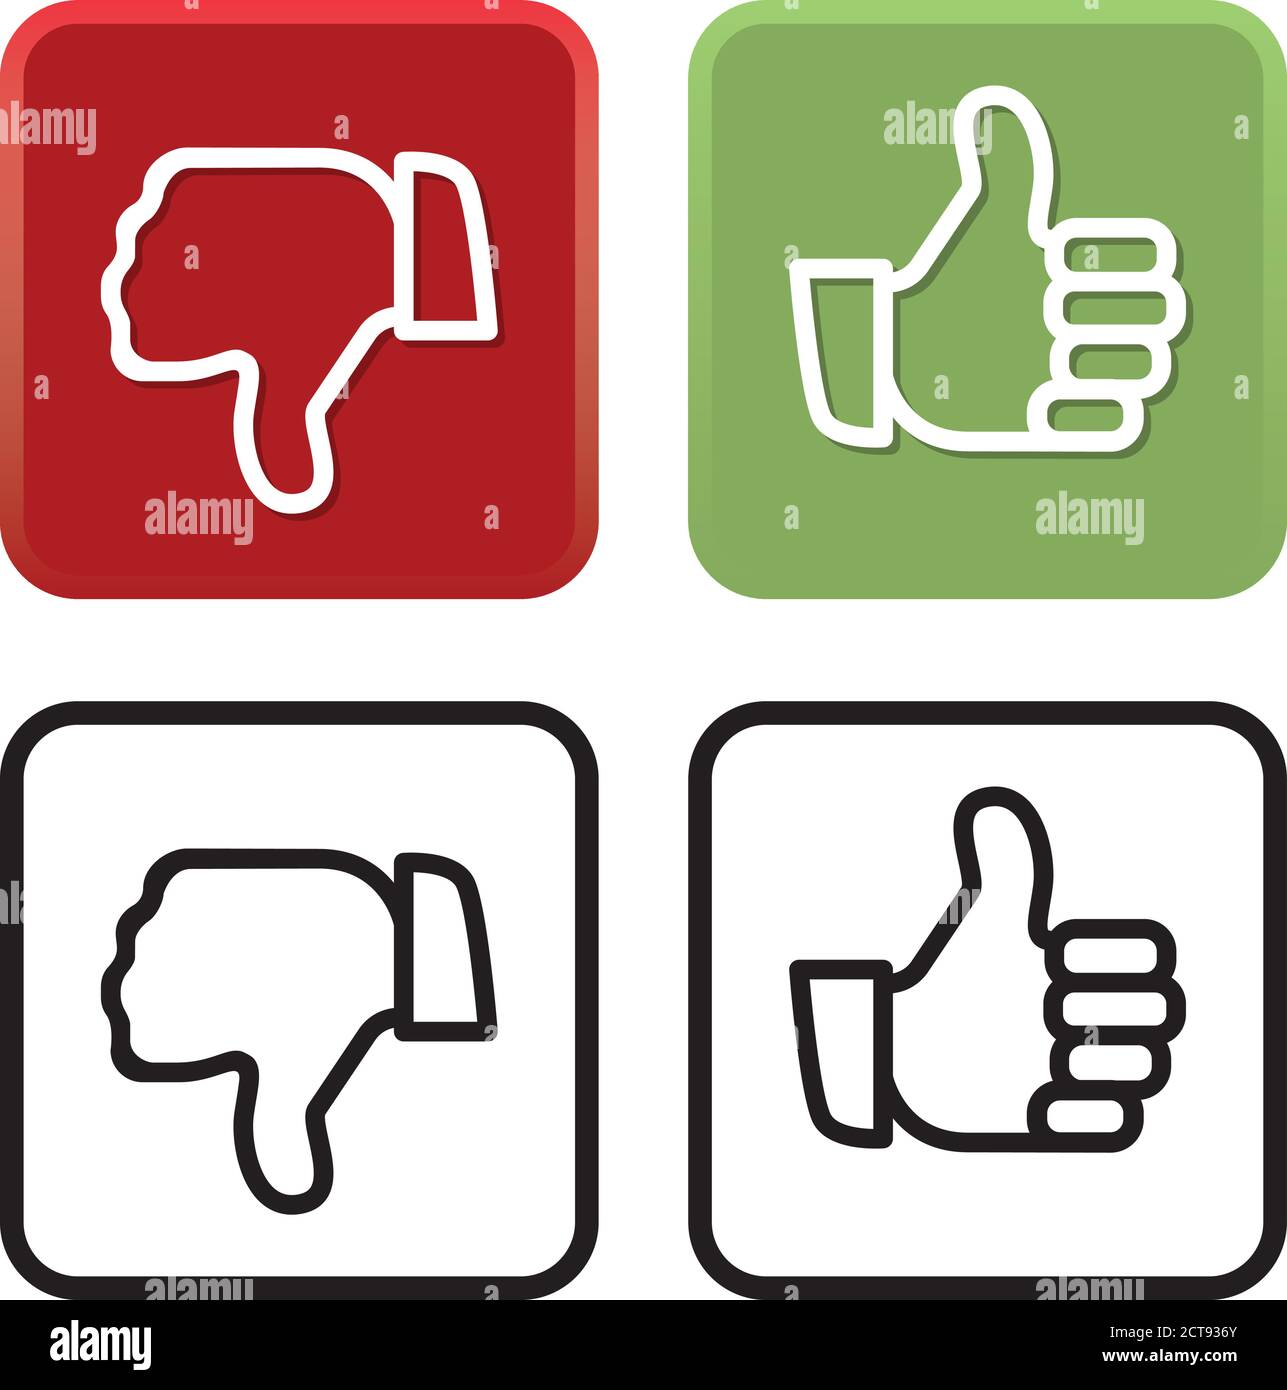 Thumbs Up and Thumbs Down in Color and Black Vector Illustration Stock Vector